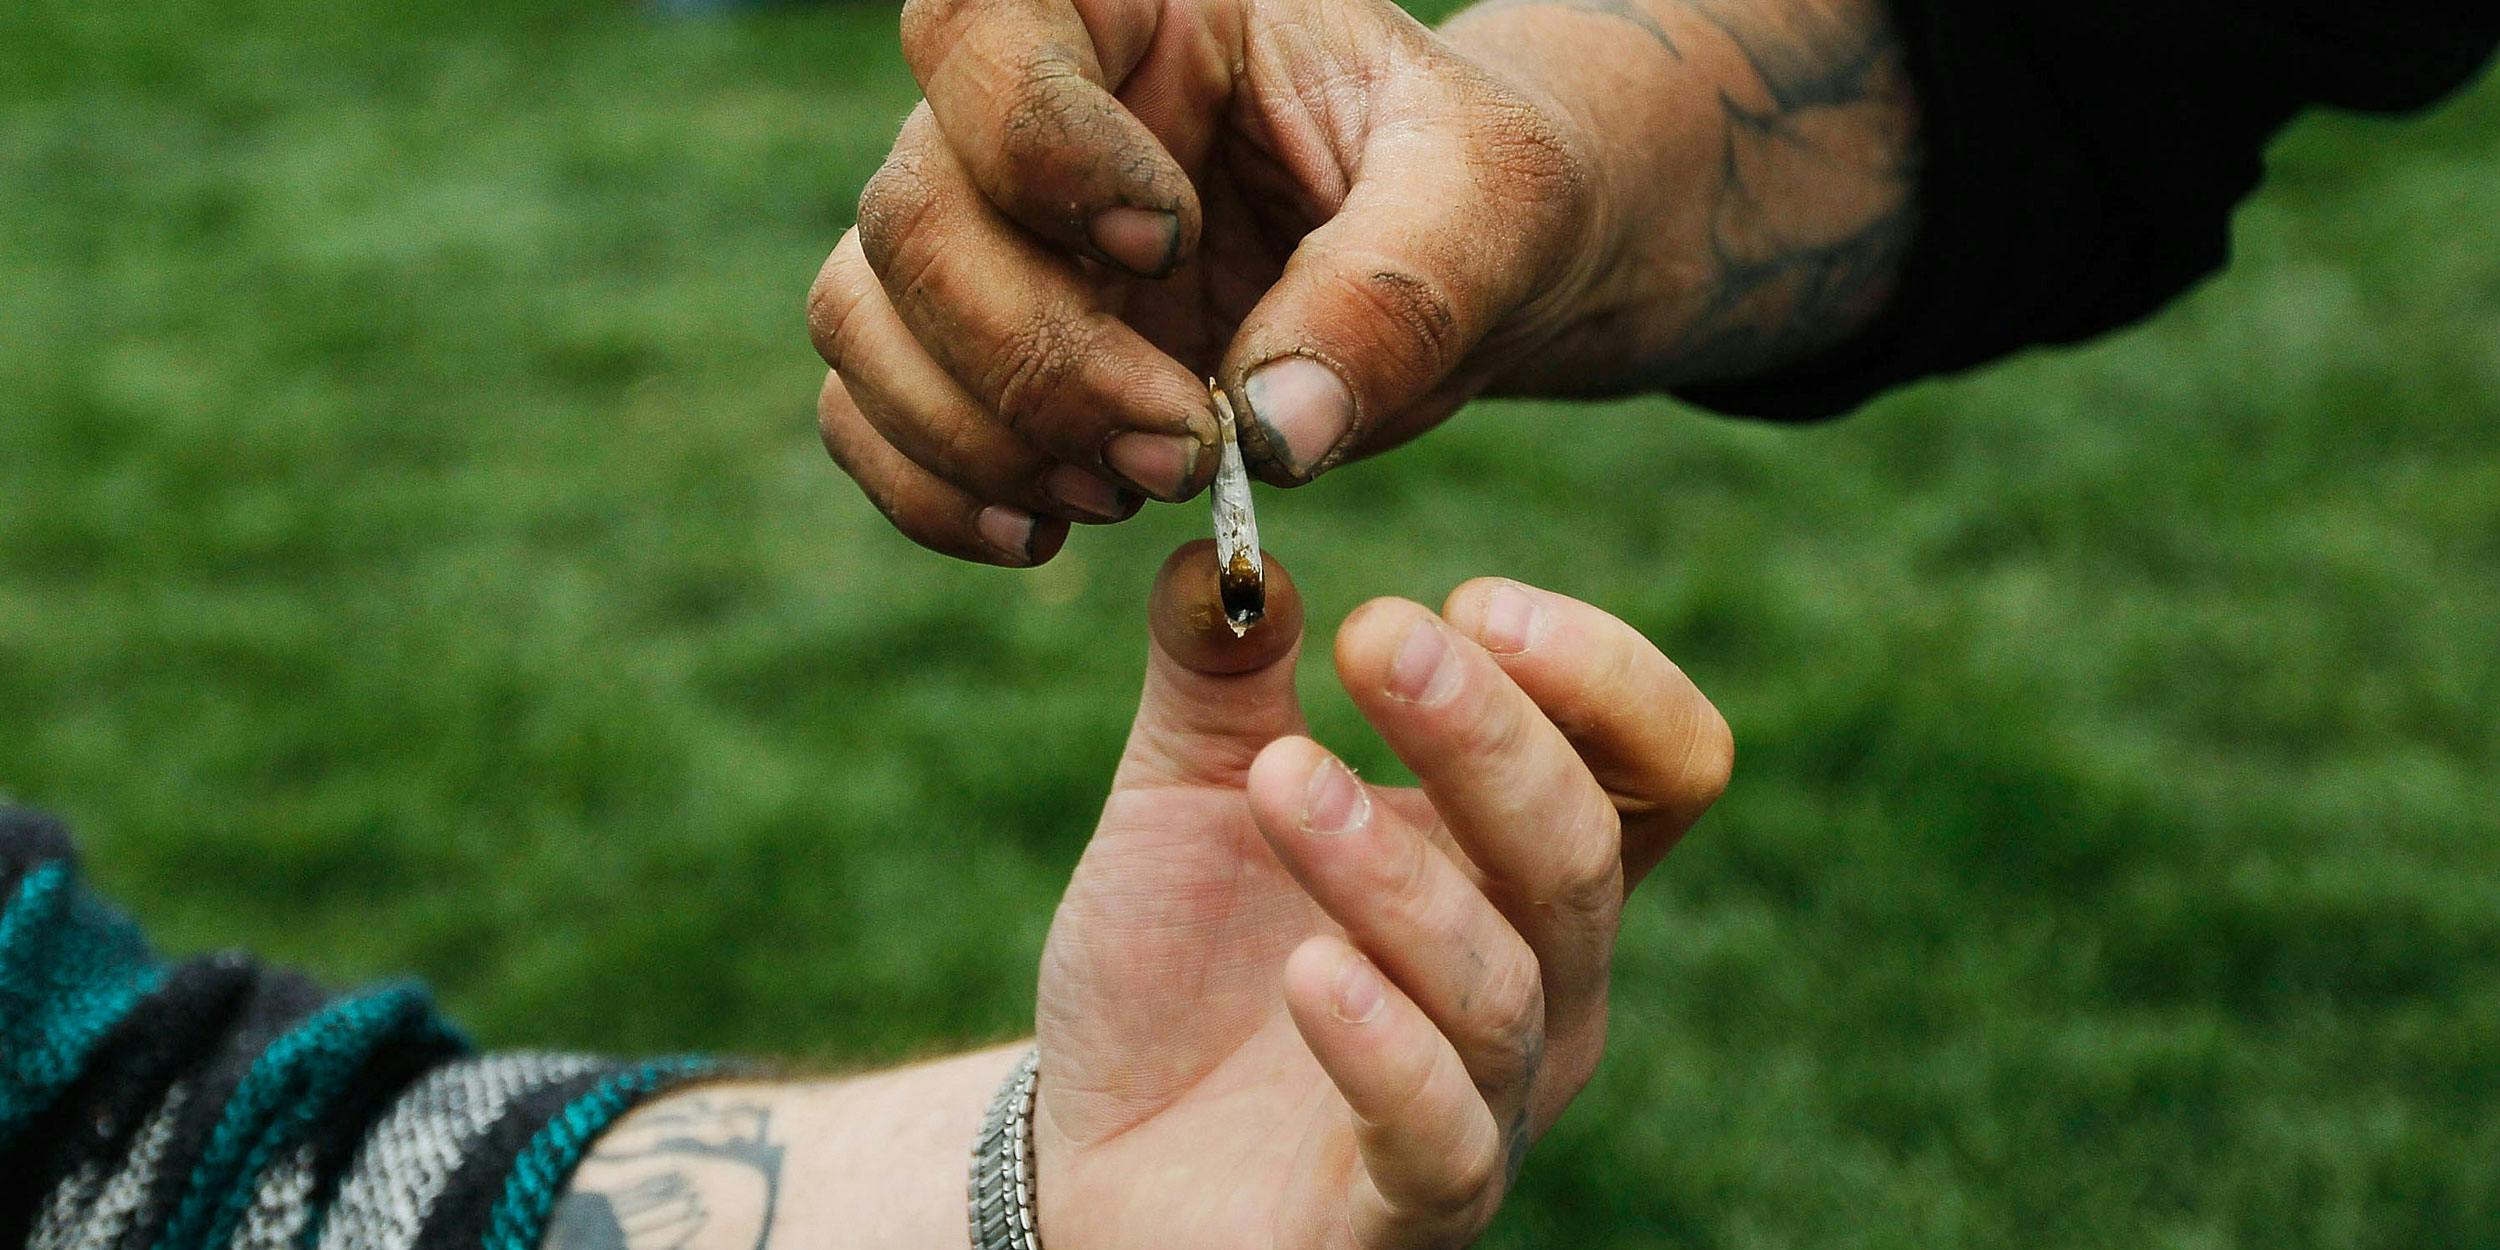 Men pass a marijuana cigarette to each other during a pro-marijuana rally at Civic Center Park with the Colorado State Capitol Building in the background on April 20, 2010 in Denver, Colorado. The DEA just updated its list of drug slang, which includes terms for weed like "pink panther."